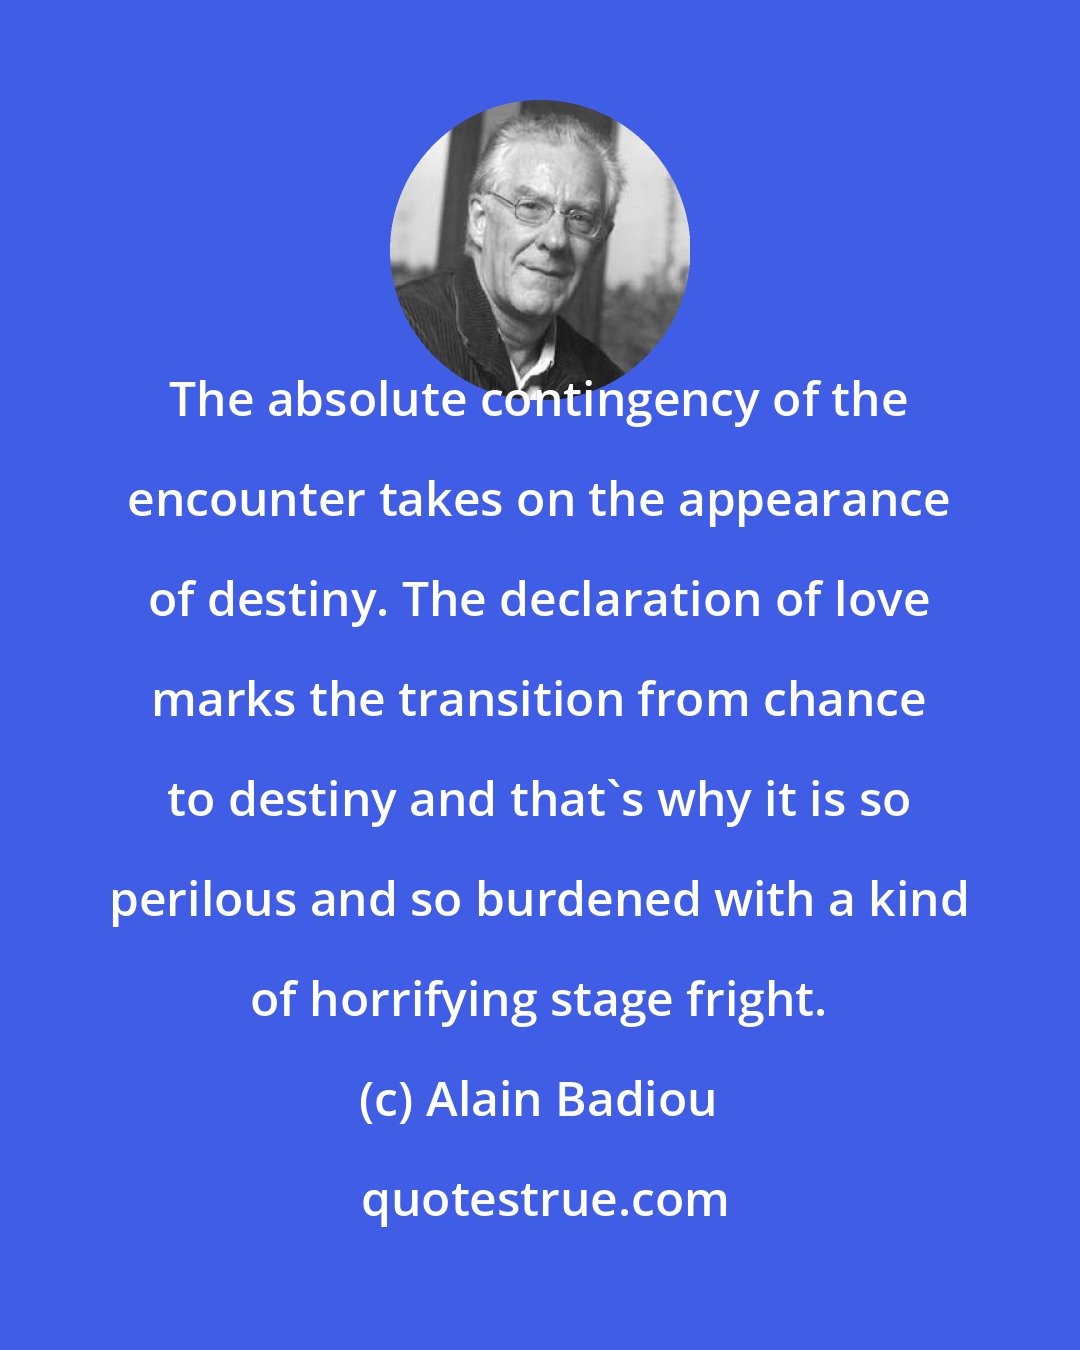 Alain Badiou: The absolute contingency of the encounter takes on the appearance of destiny. The declaration of love marks the transition from chance to destiny and that's why it is so perilous and so burdened with a kind of horrifying stage fright.